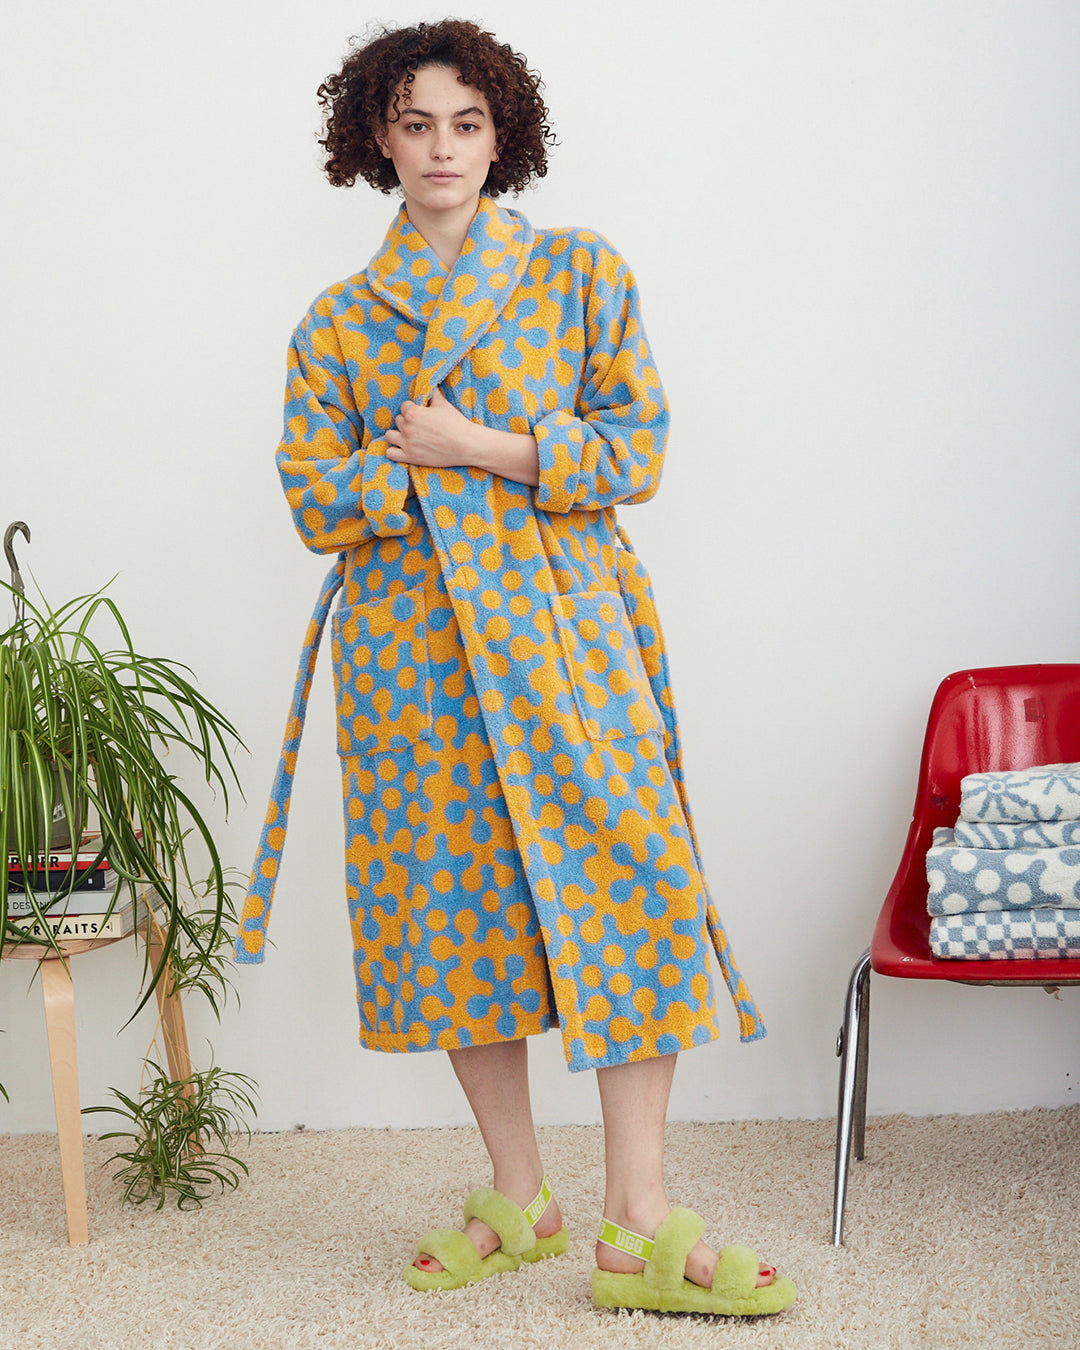 Dusen Dusen Atom Bathrobe. Bathrobe in Atom pattern. Cotton terry bathrobe with shawl collar, patch pockets, and tie in cornflower and marigold Atom pattern. 100% cotton terry, 450 gsm. Made in Turkey. This item is Oeko-Tex Standard 100 certified (no harmful chemicals were used during its production).